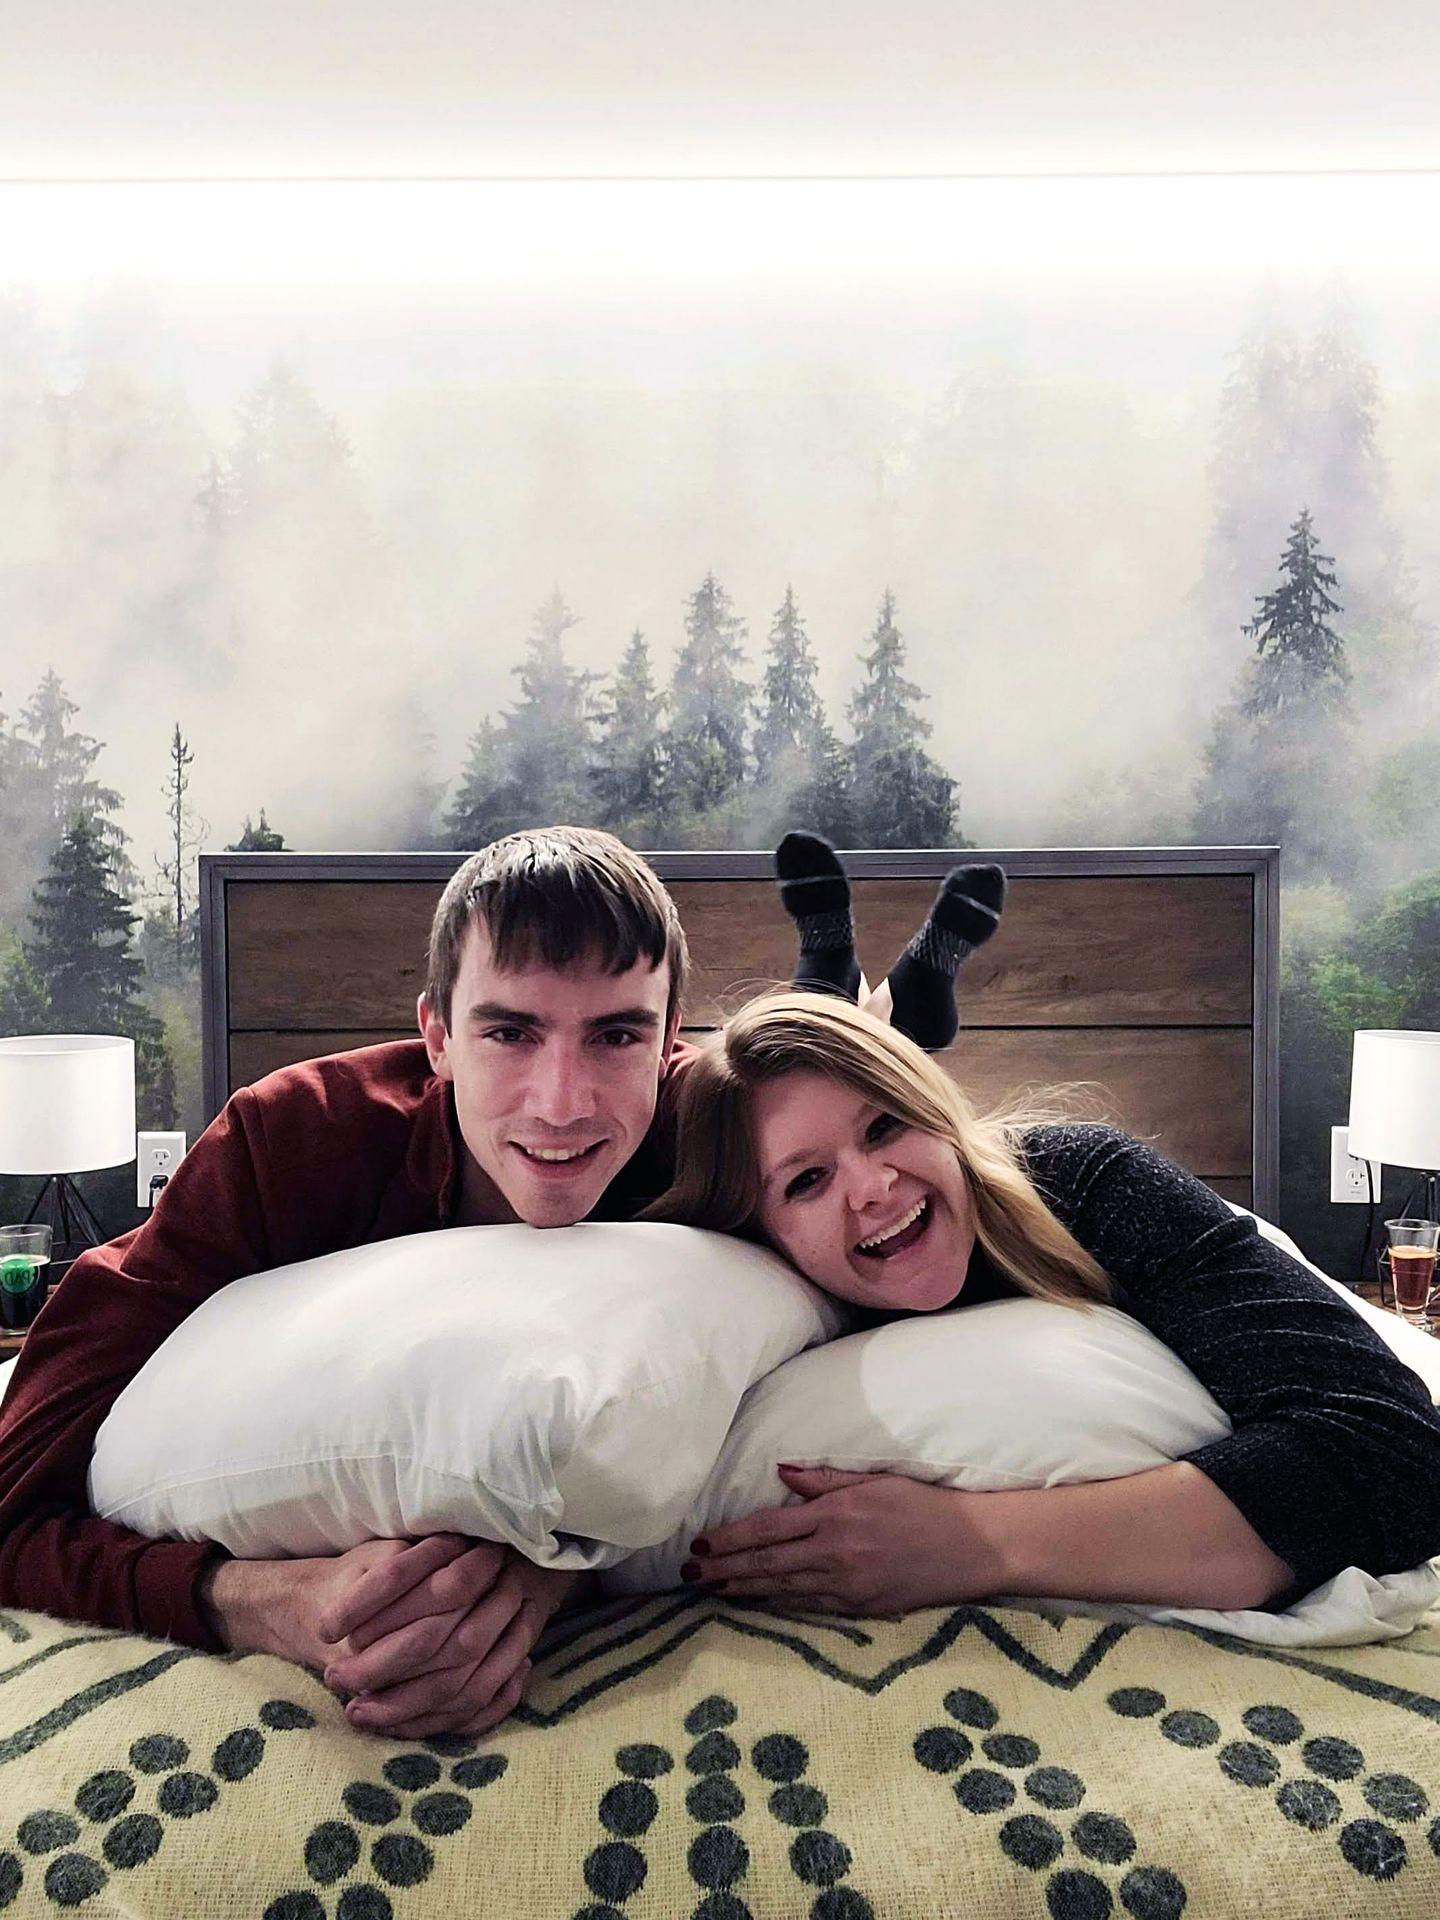 Lydia and Joe laying on their stomach on the bed in their room in The Pad. There is a beautiful scene of snowy trees in the background